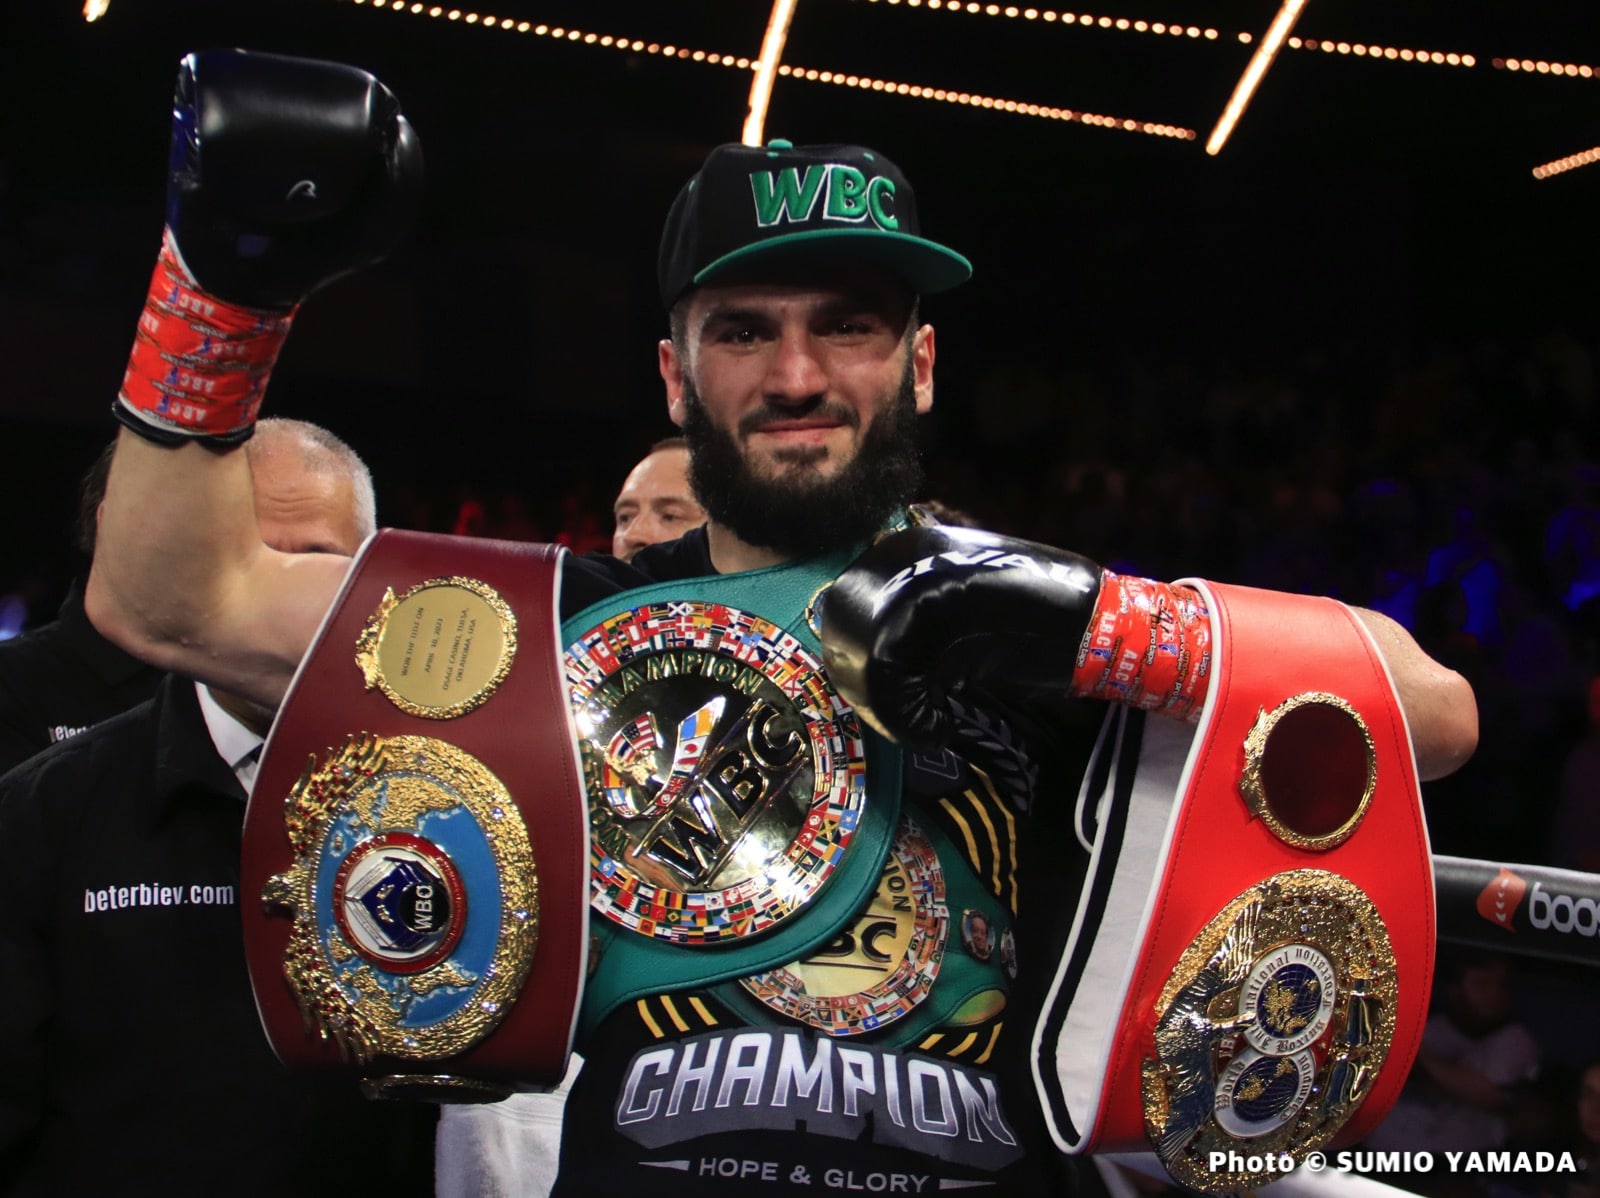 Image: Beterbiev calls out Bivol: "Let's do it" for undisputed 175-lb championship